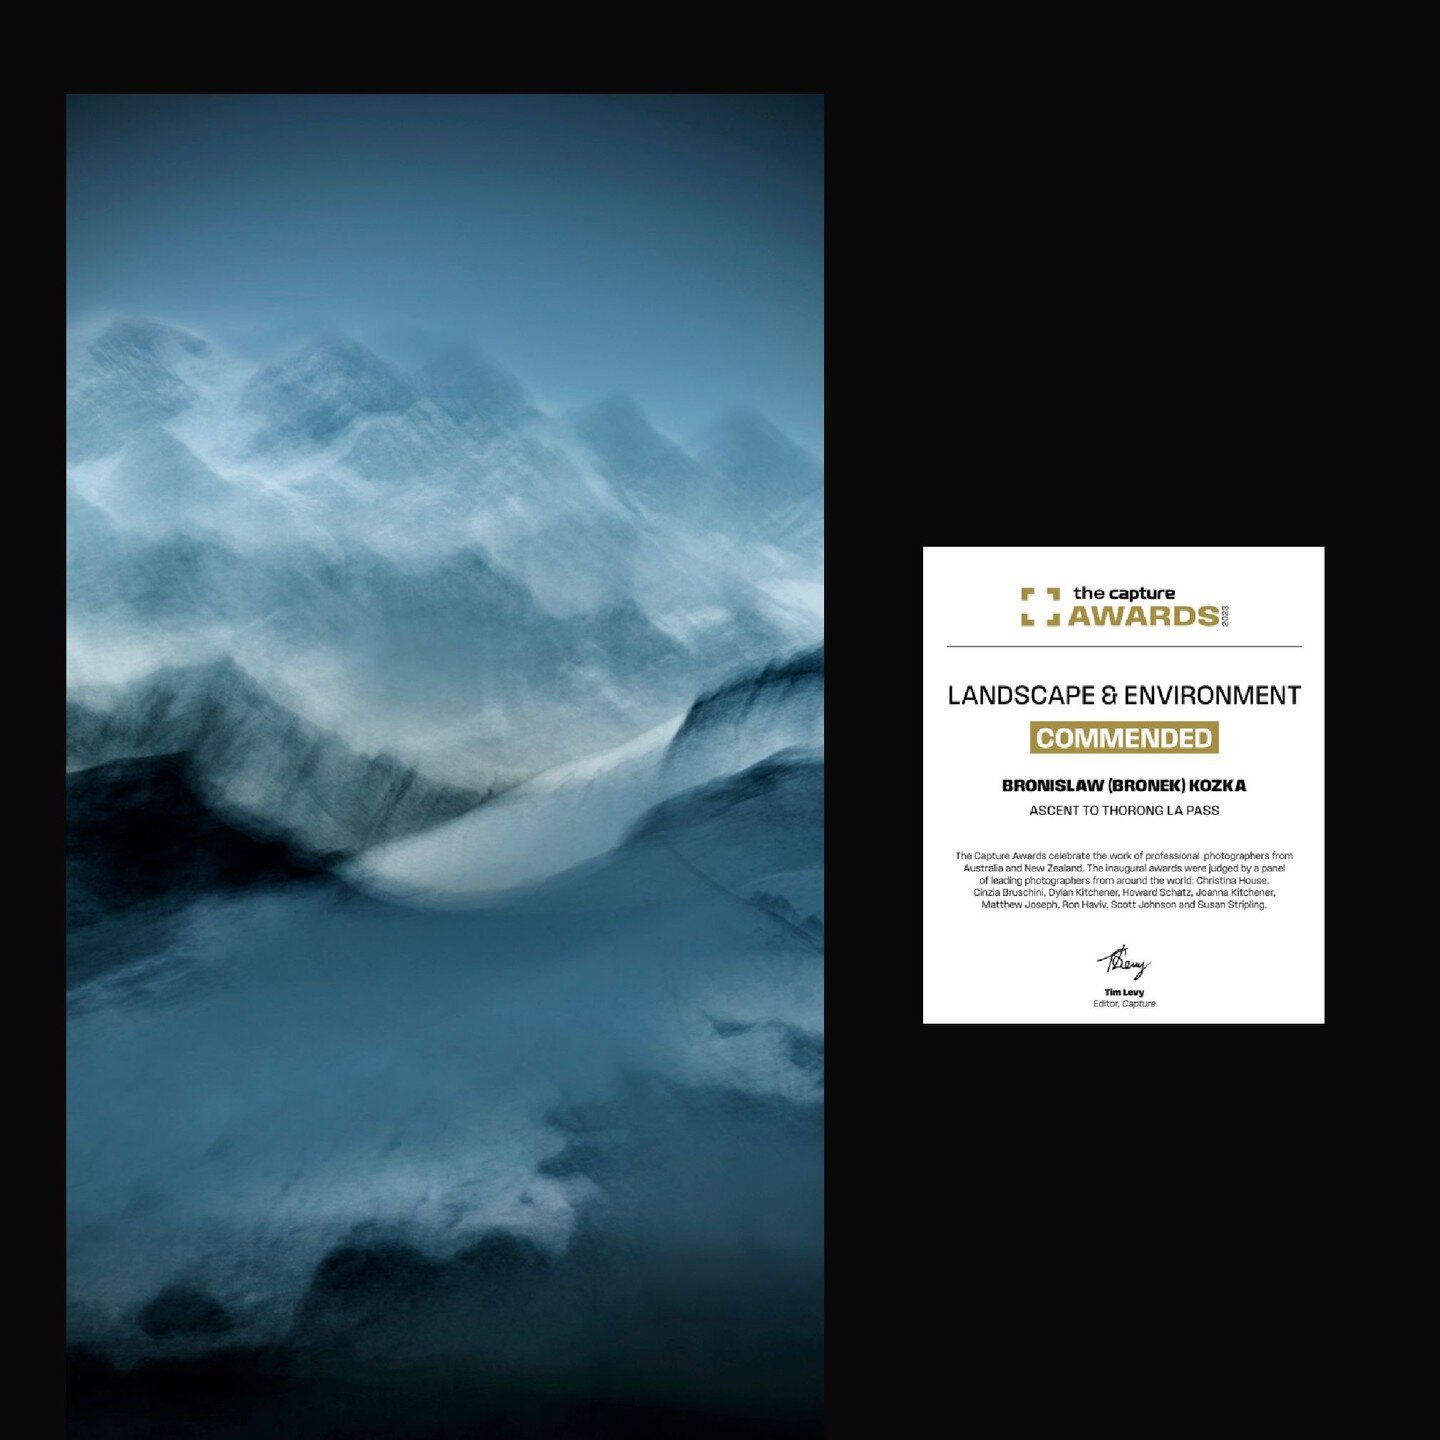 I am pleased to announce that my photograph, &quot;Ascent to Thorong La Pass,&quot; has been commended in The Capture Awards for Landscape Photography. 

The process of capturing &quot;Ascent to Thorong La Pass&quot; was an endeavour that combined ri